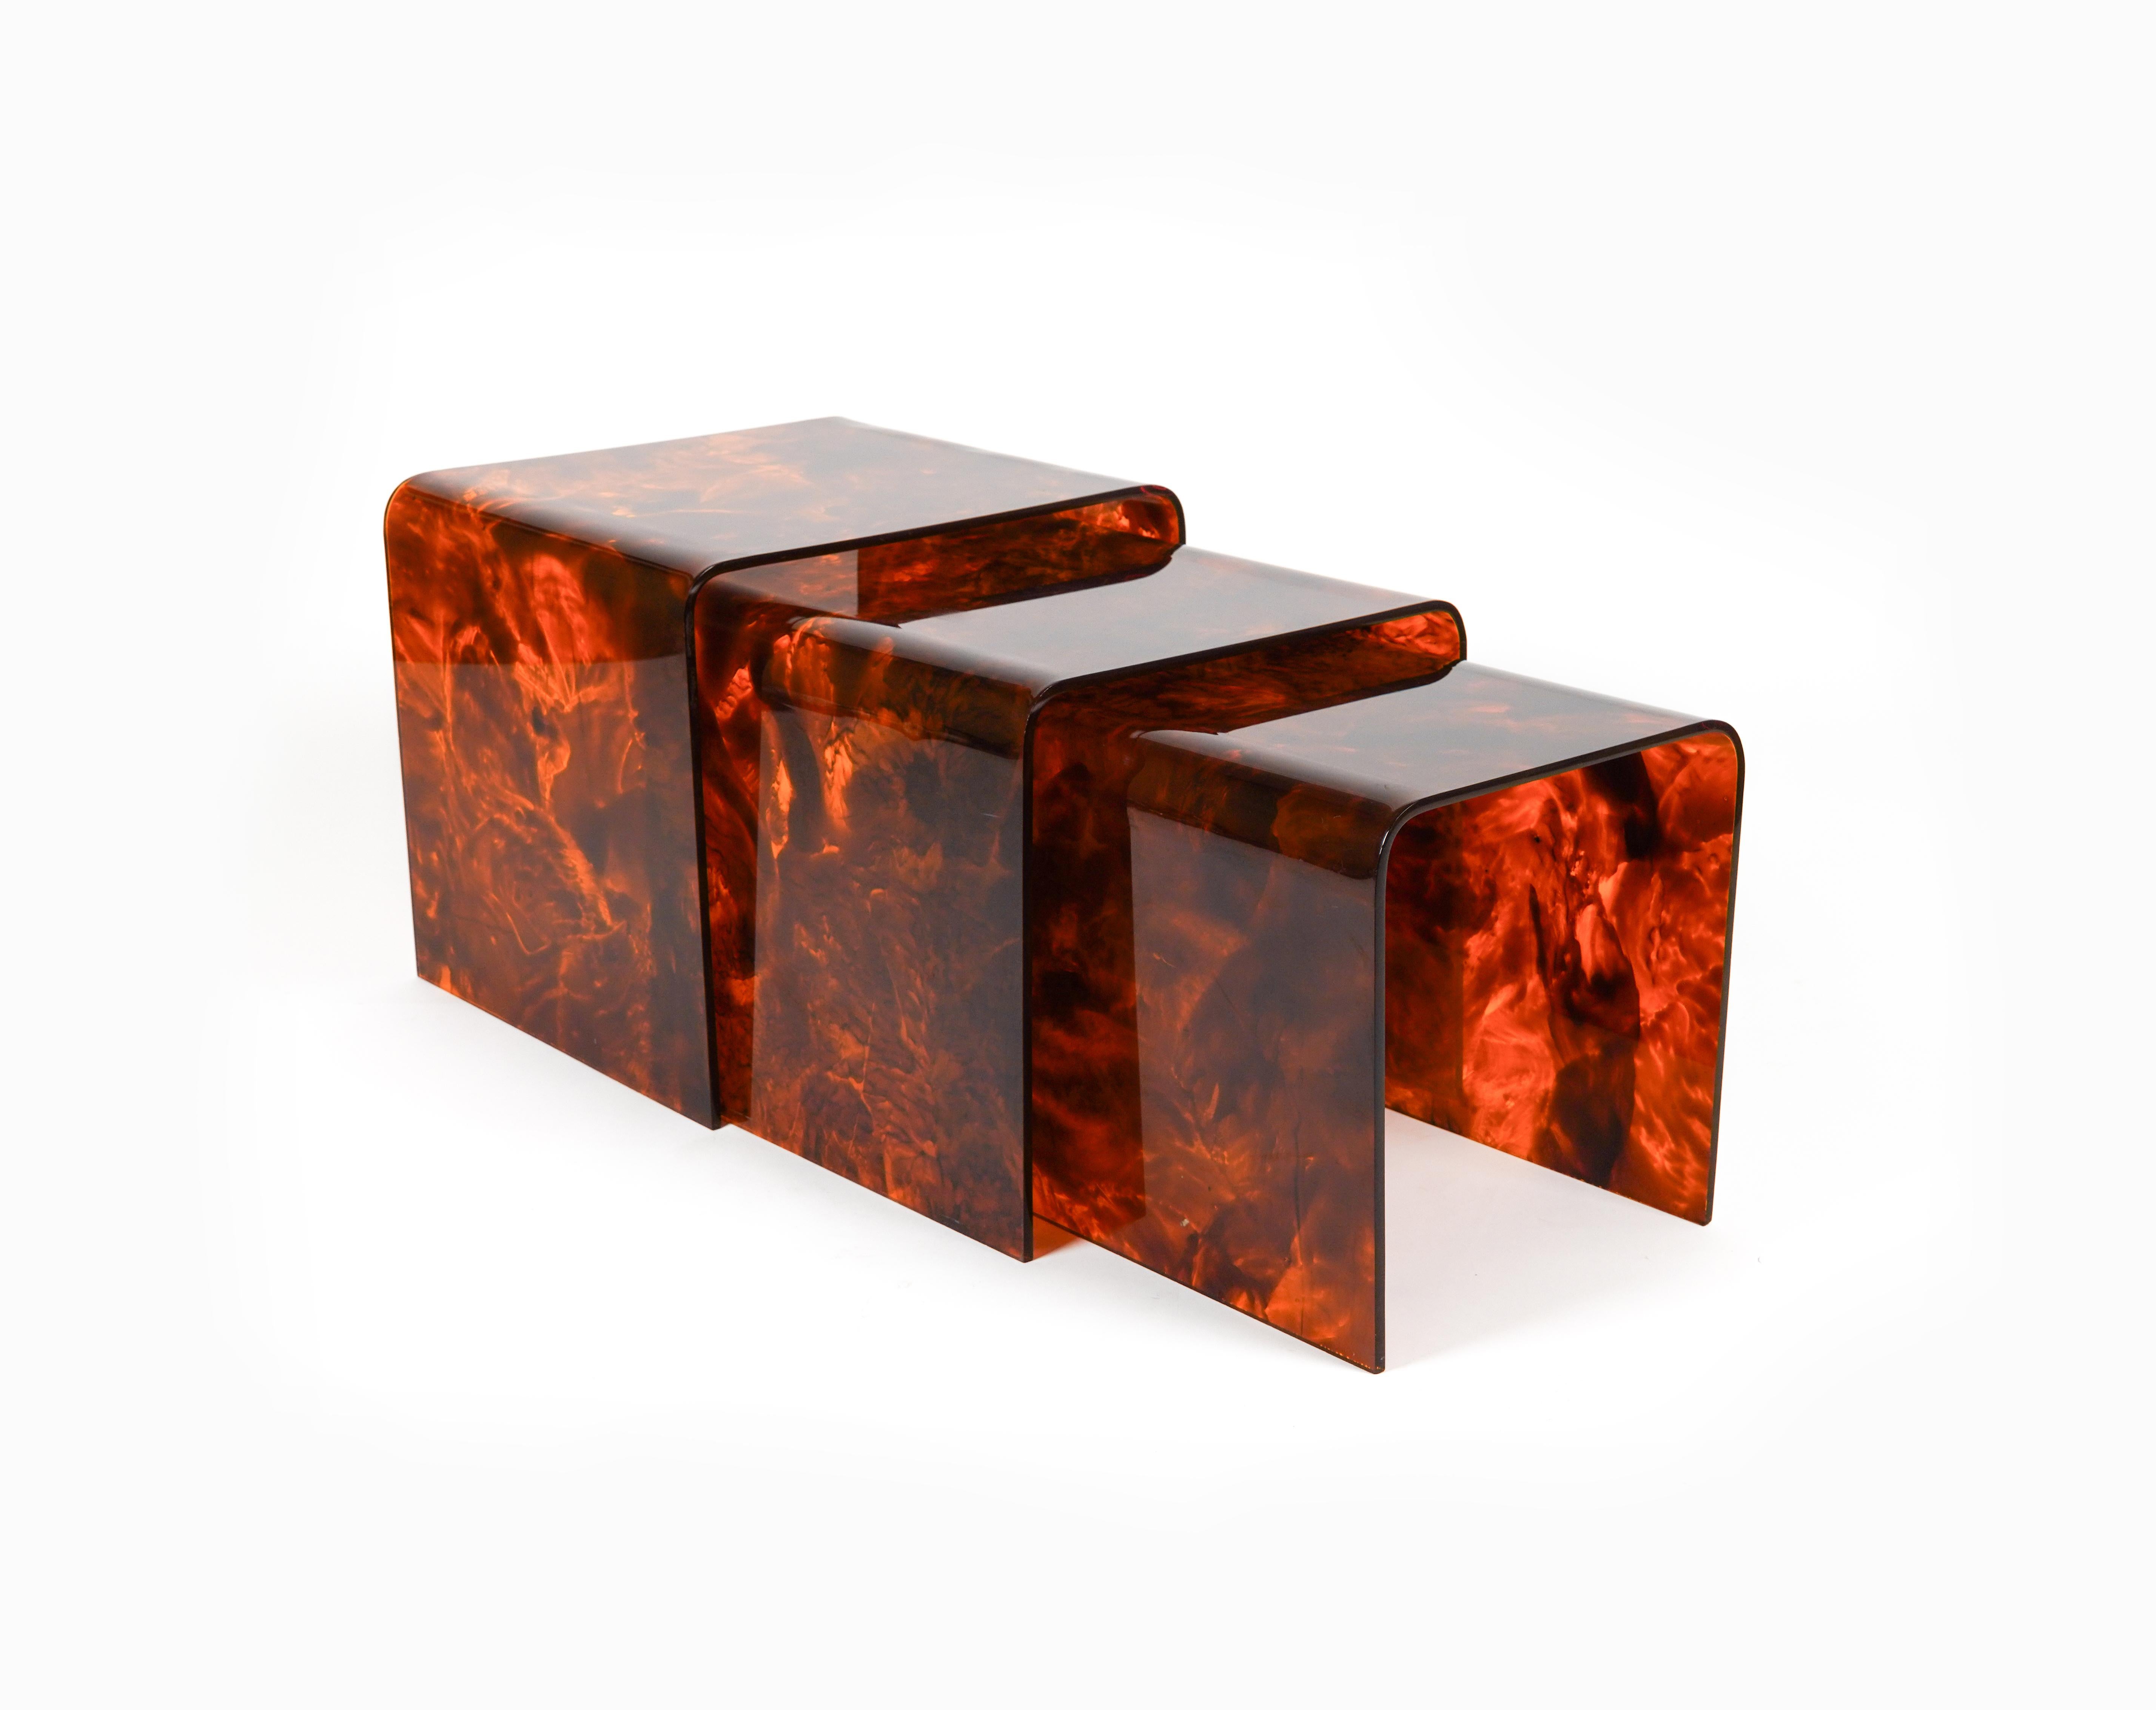 Set of 3 Nesting Tables in Lucite Faux Tortoiseshell Christian Dior, Italy 1970s For Sale 4